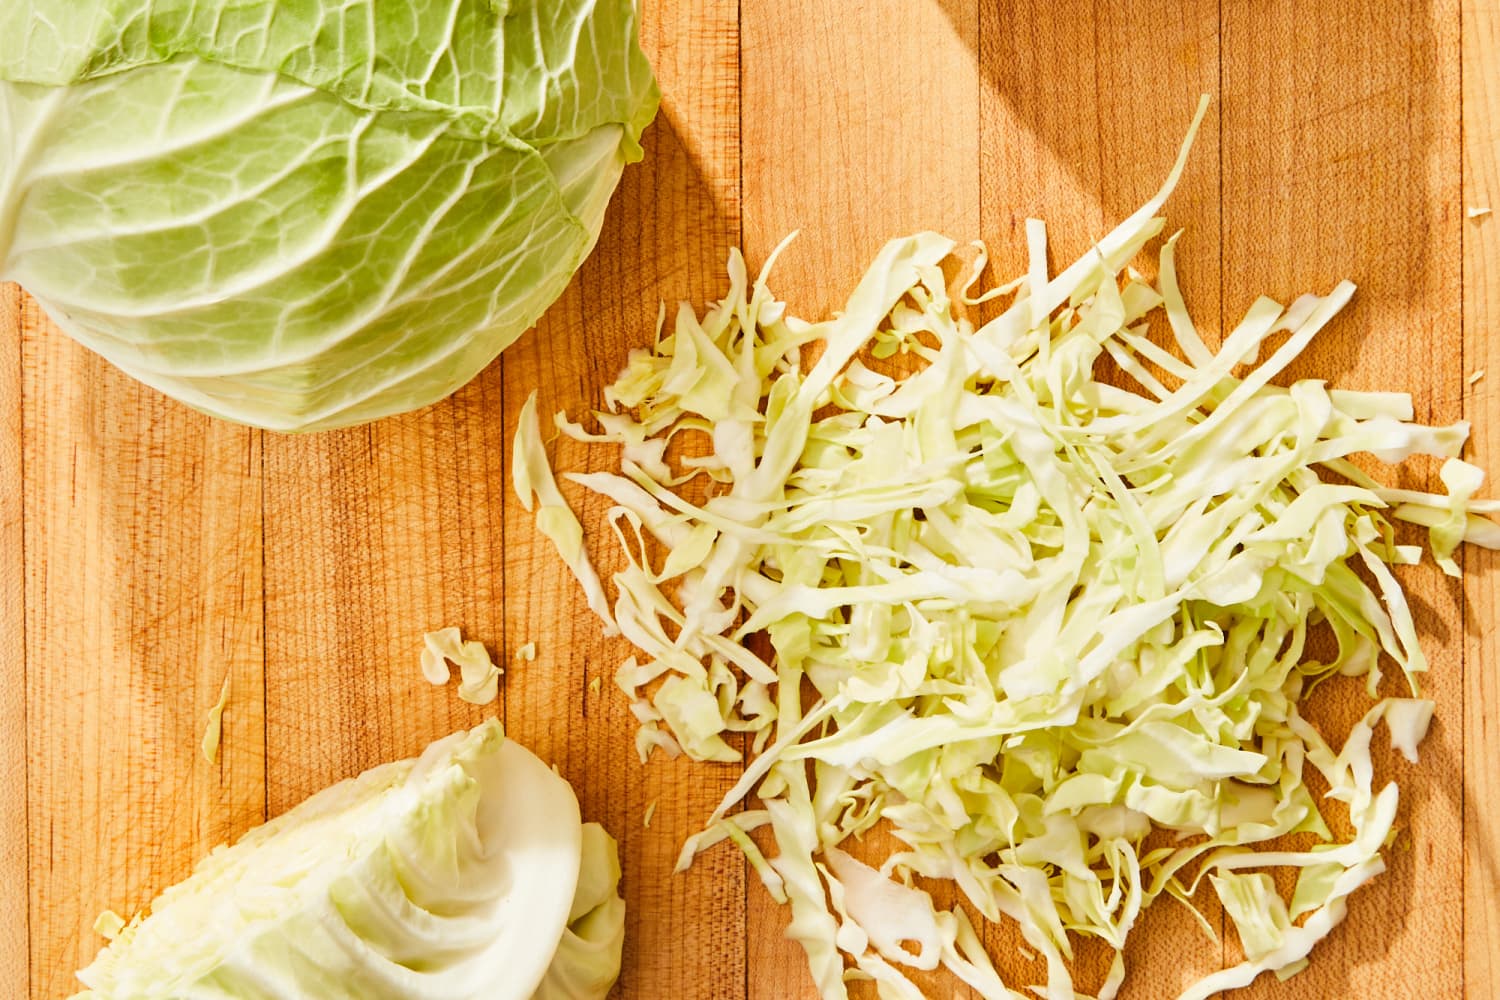 How To Shred Cabbage (3 Ways)